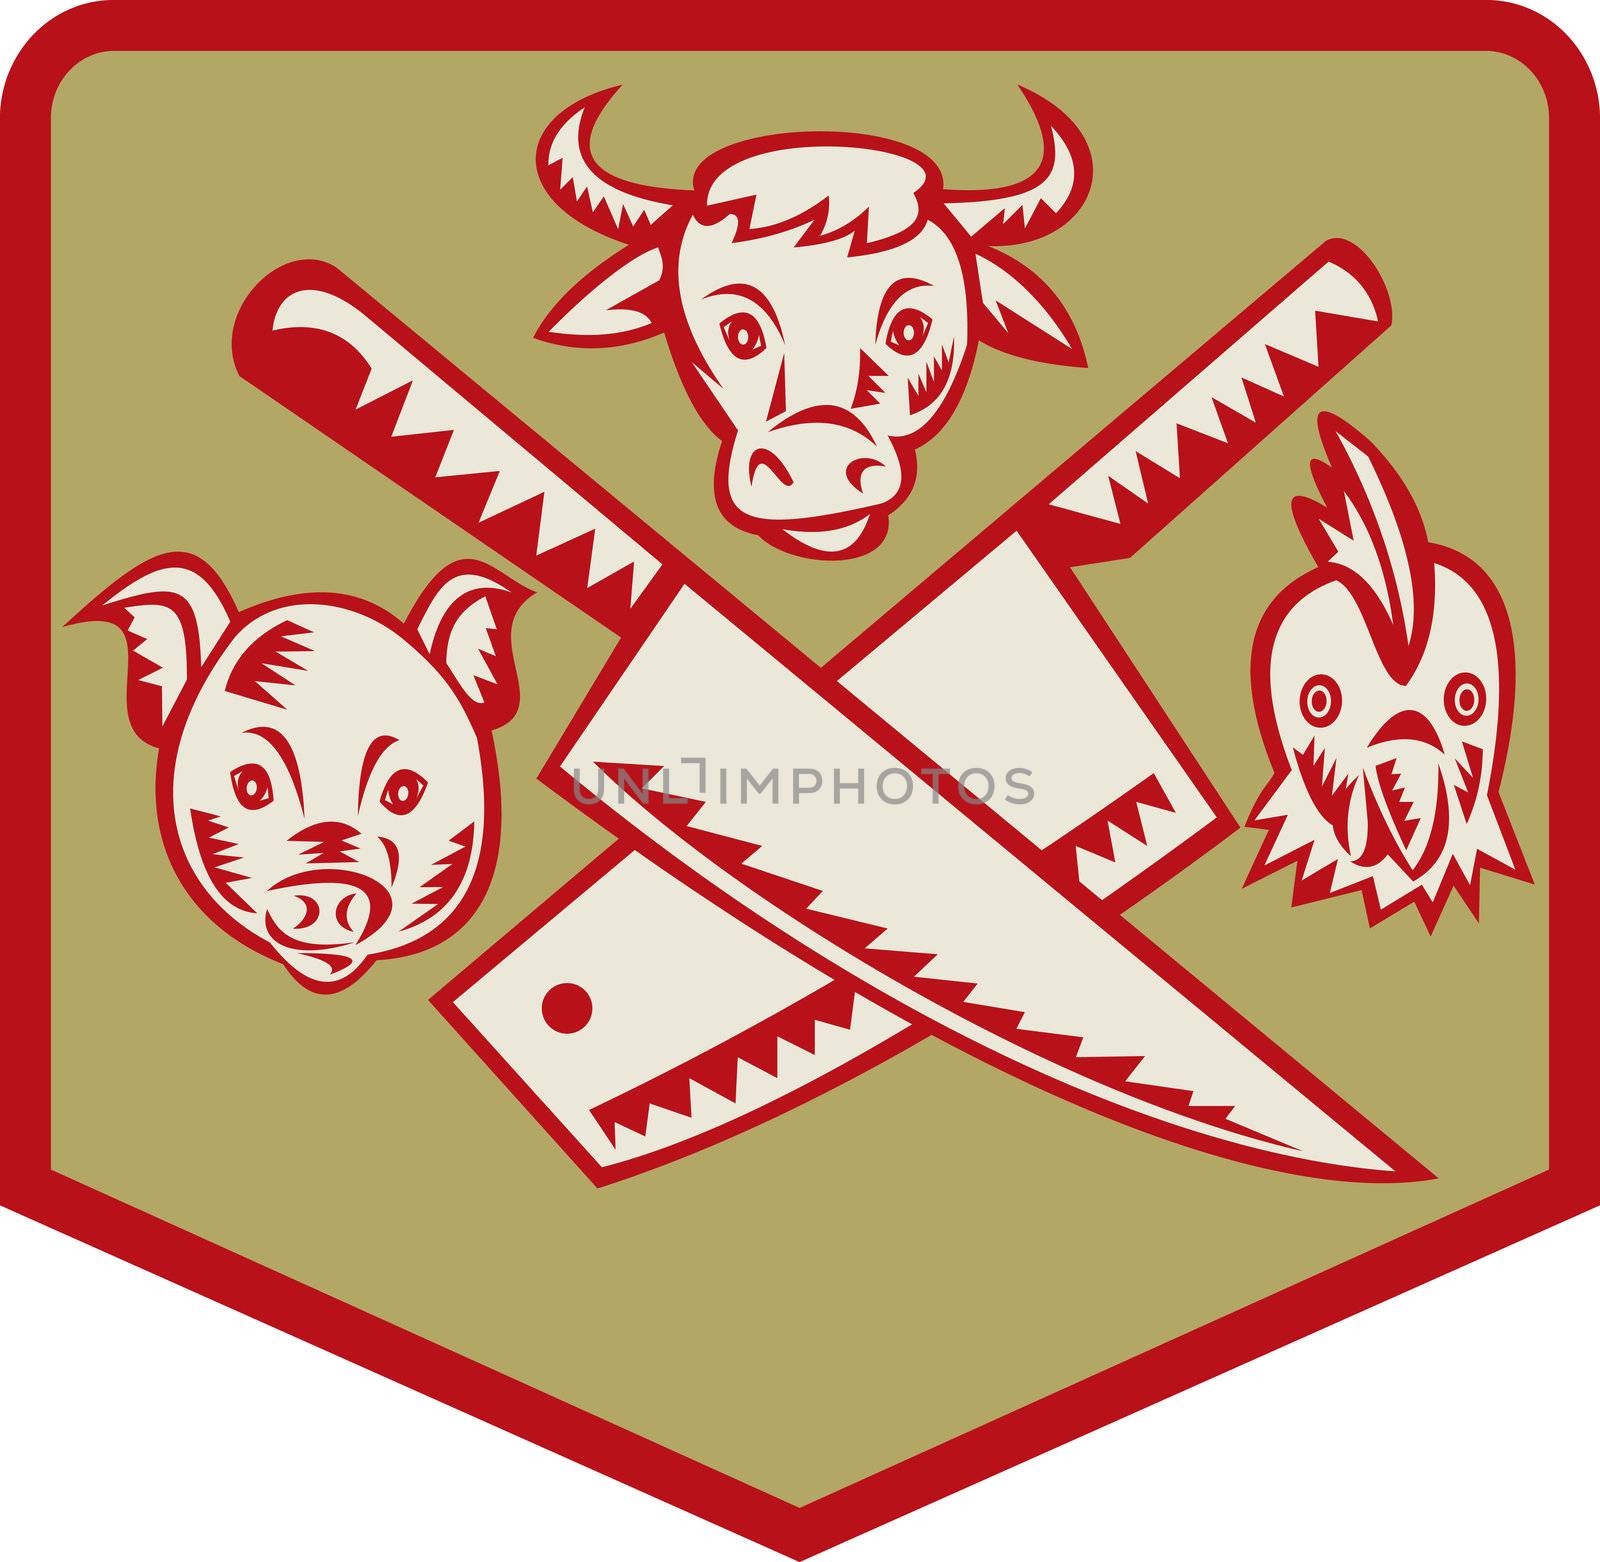 Imagery shows a Cow,pig and chicken with crossed butcher knife set inside a shield